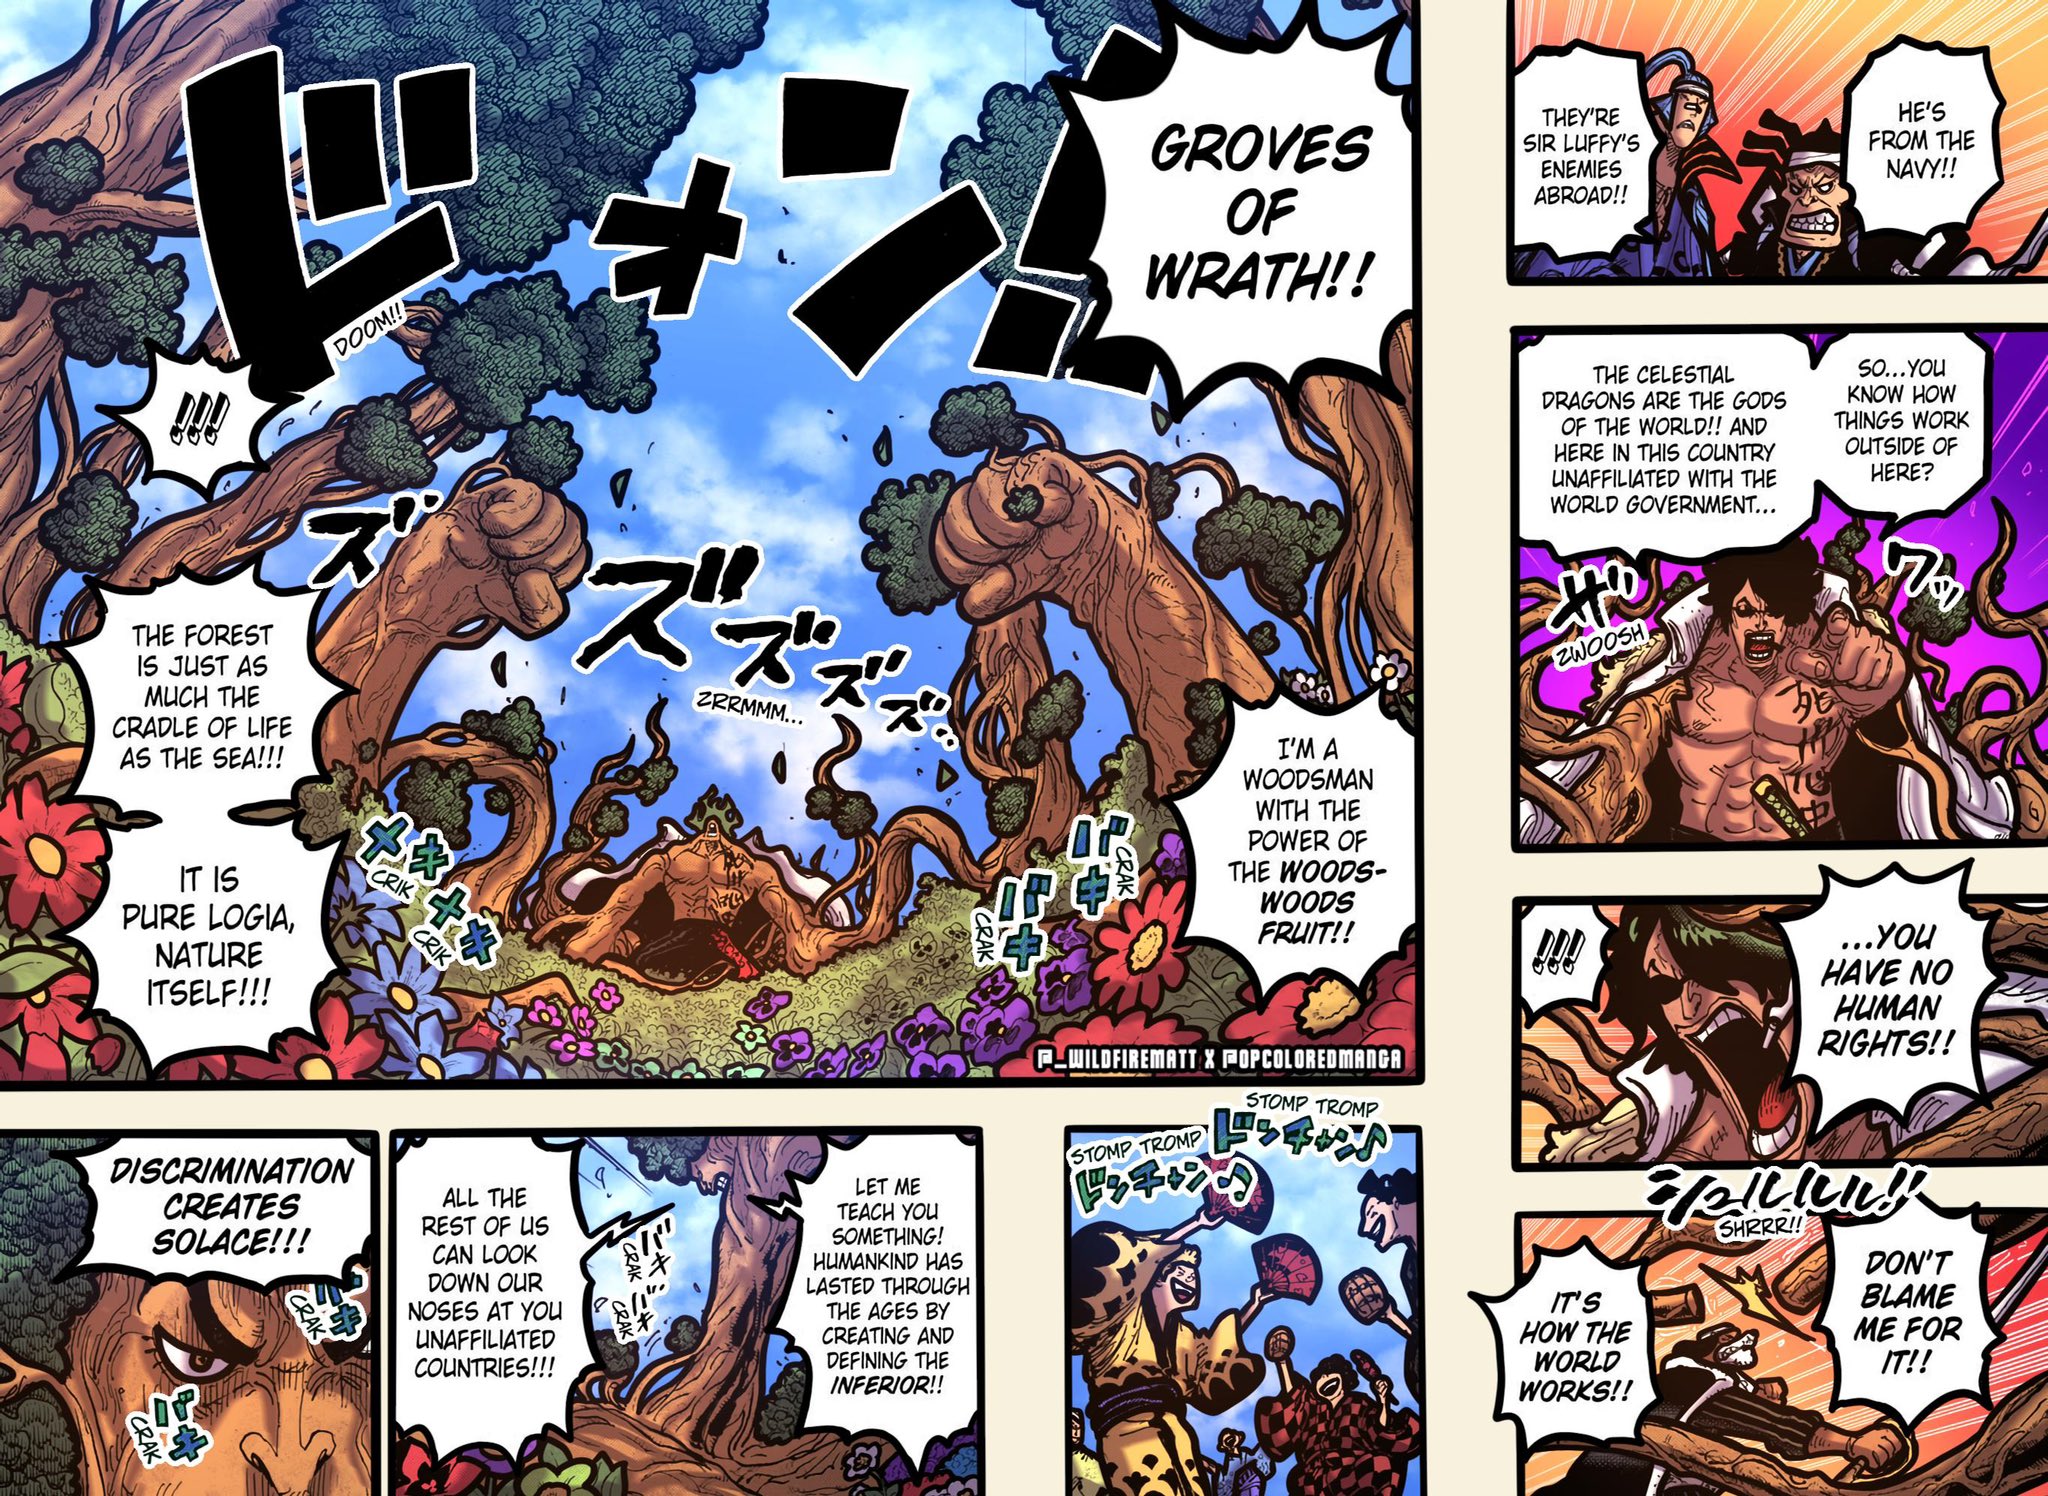 One Piece Colored Manga One Piece Chapter 1054 Fully Colored English T Co Hcemj0cbt0 Arabic T Co Dgd8rqs26y Onepiece Onepiece1054 Onepiecemanga T Co Huxrfhxyfb Twitter